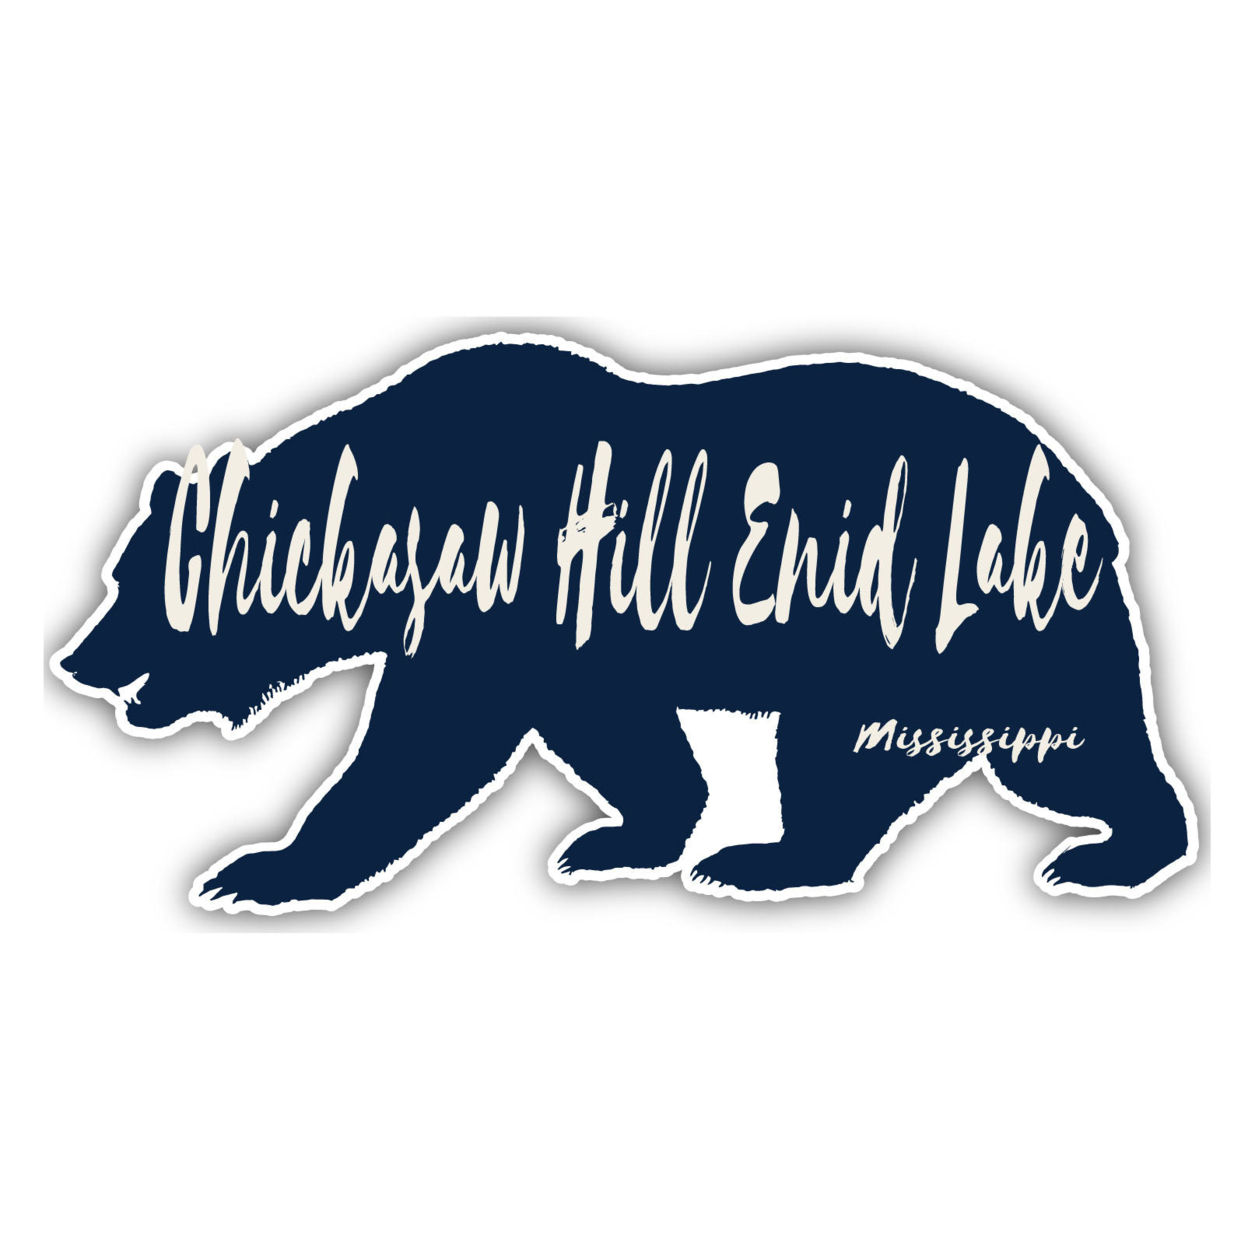 Chickasaw Hill Enid Lake Mississippi Souvenir Decorative Stickers (Choose Theme And Size) - 4-Pack, 12-Inch, Bear